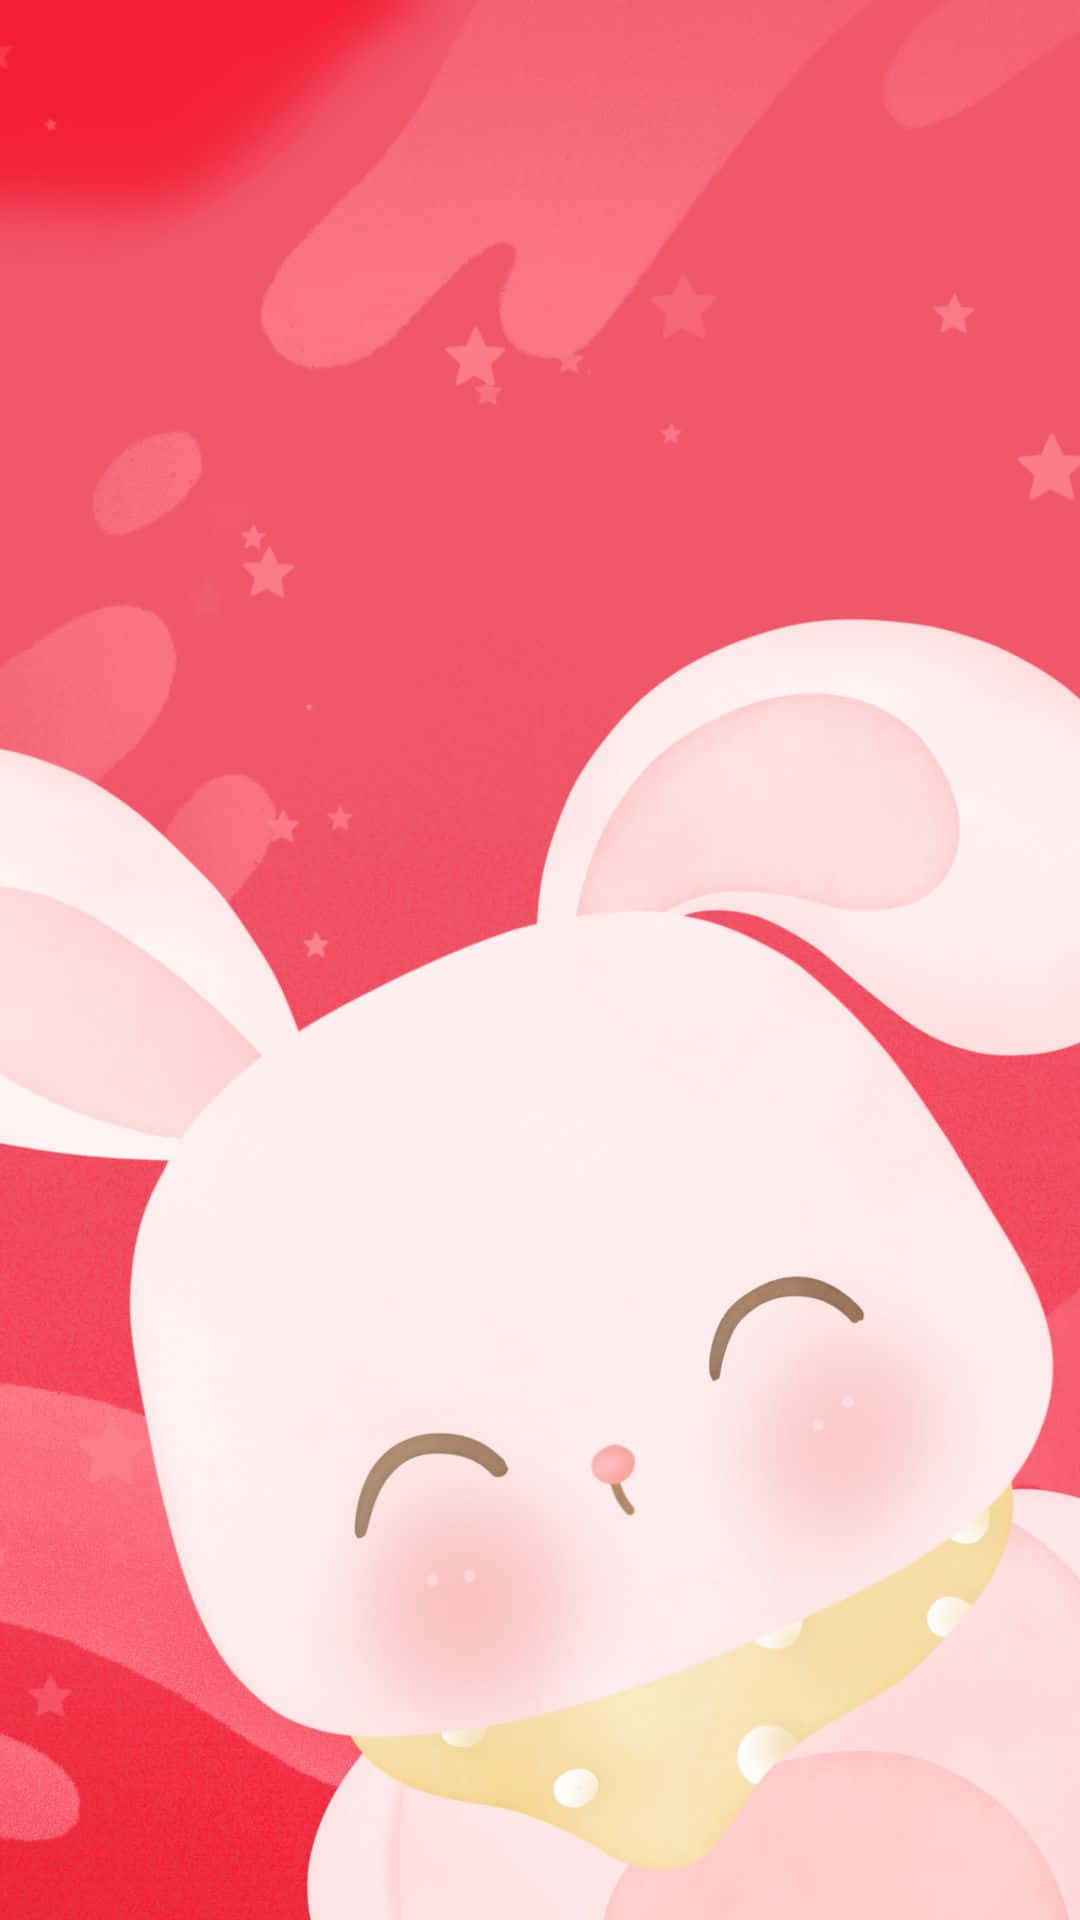 A Pink Bunny Sitting on a Plush Rug Wallpaper